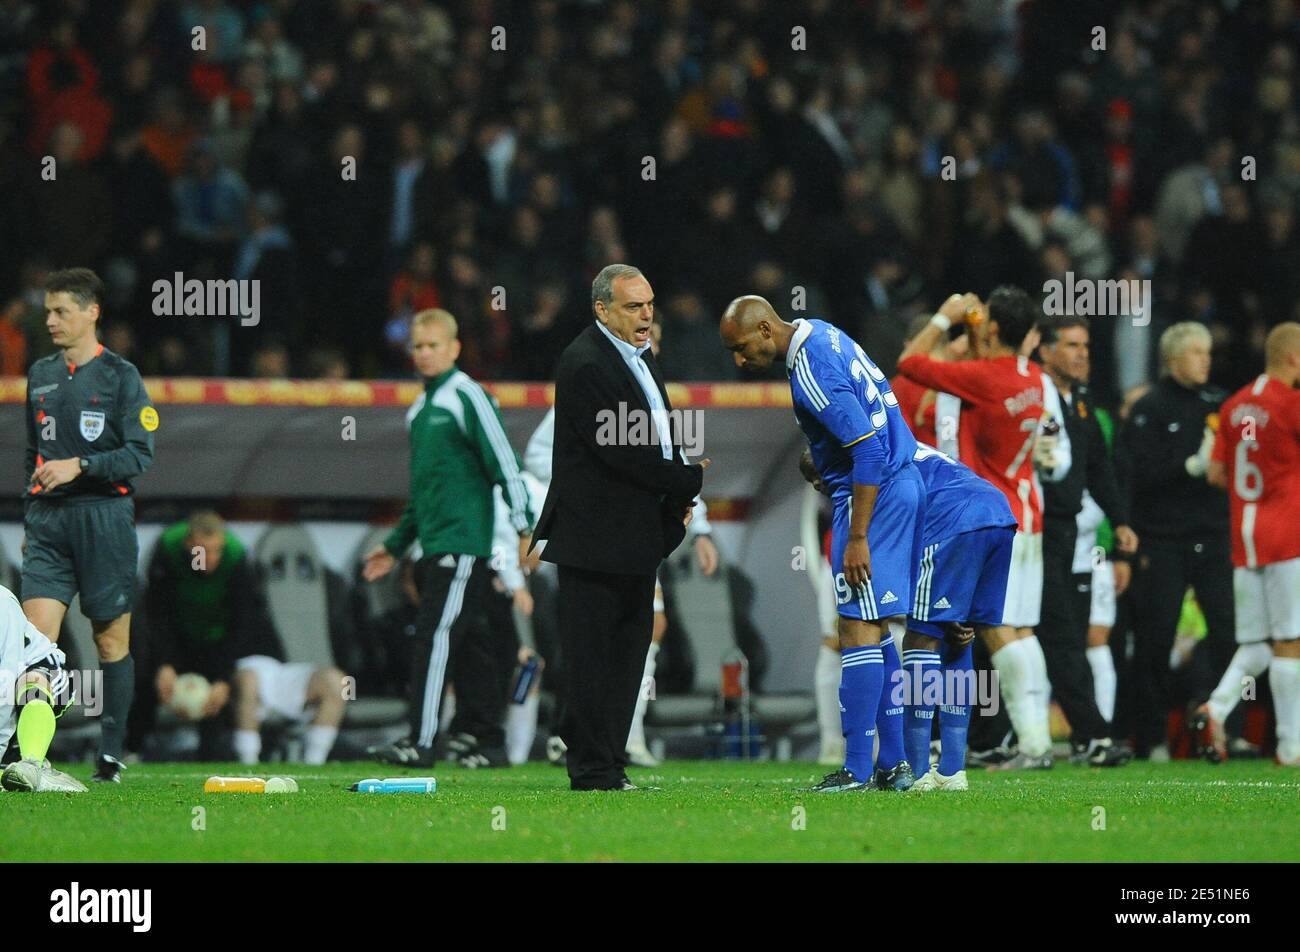 Chelsea's coach Avram Grant speaks with Nicolas Anelka during the UEFA Champions Final Soccer match, Manchester United vs Chelsea at the Luzhniki Stadium in Moscow, Russia on May 21, 2008. The